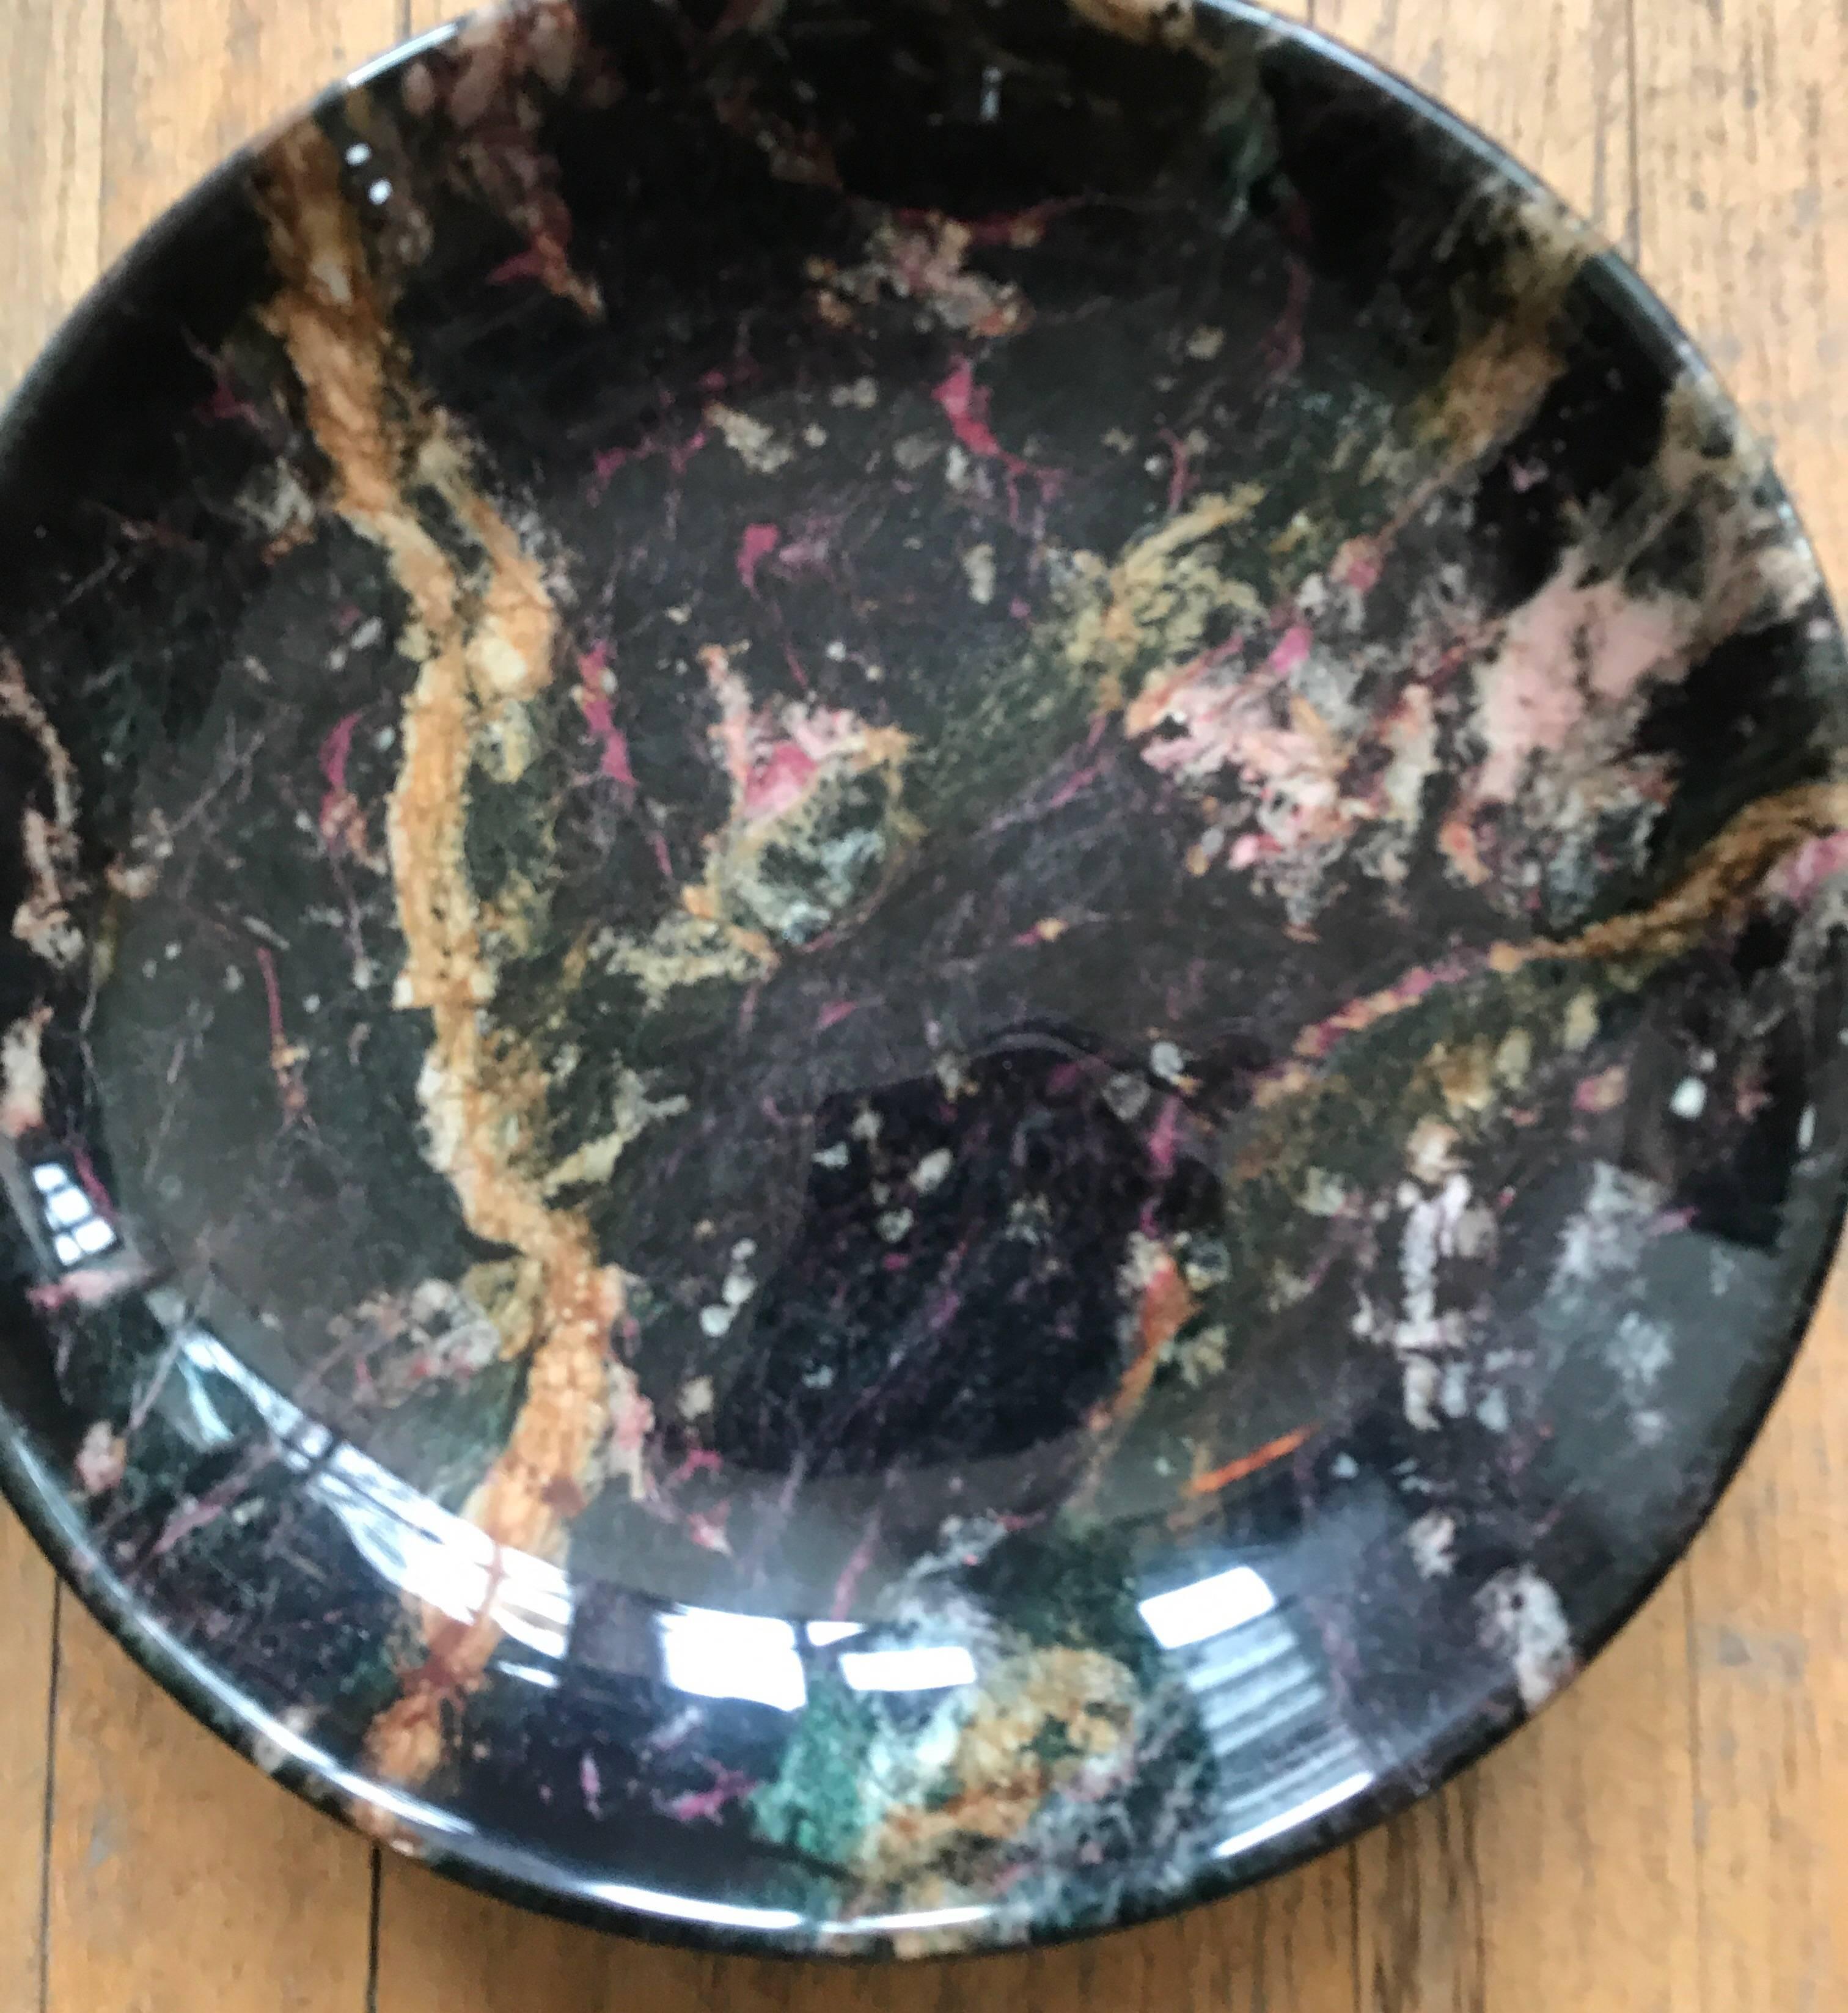 A richly grained Italian black marble centrepiece bowl by Up & Up.
Elegant Mid-Century Modern decorative tabletop object.